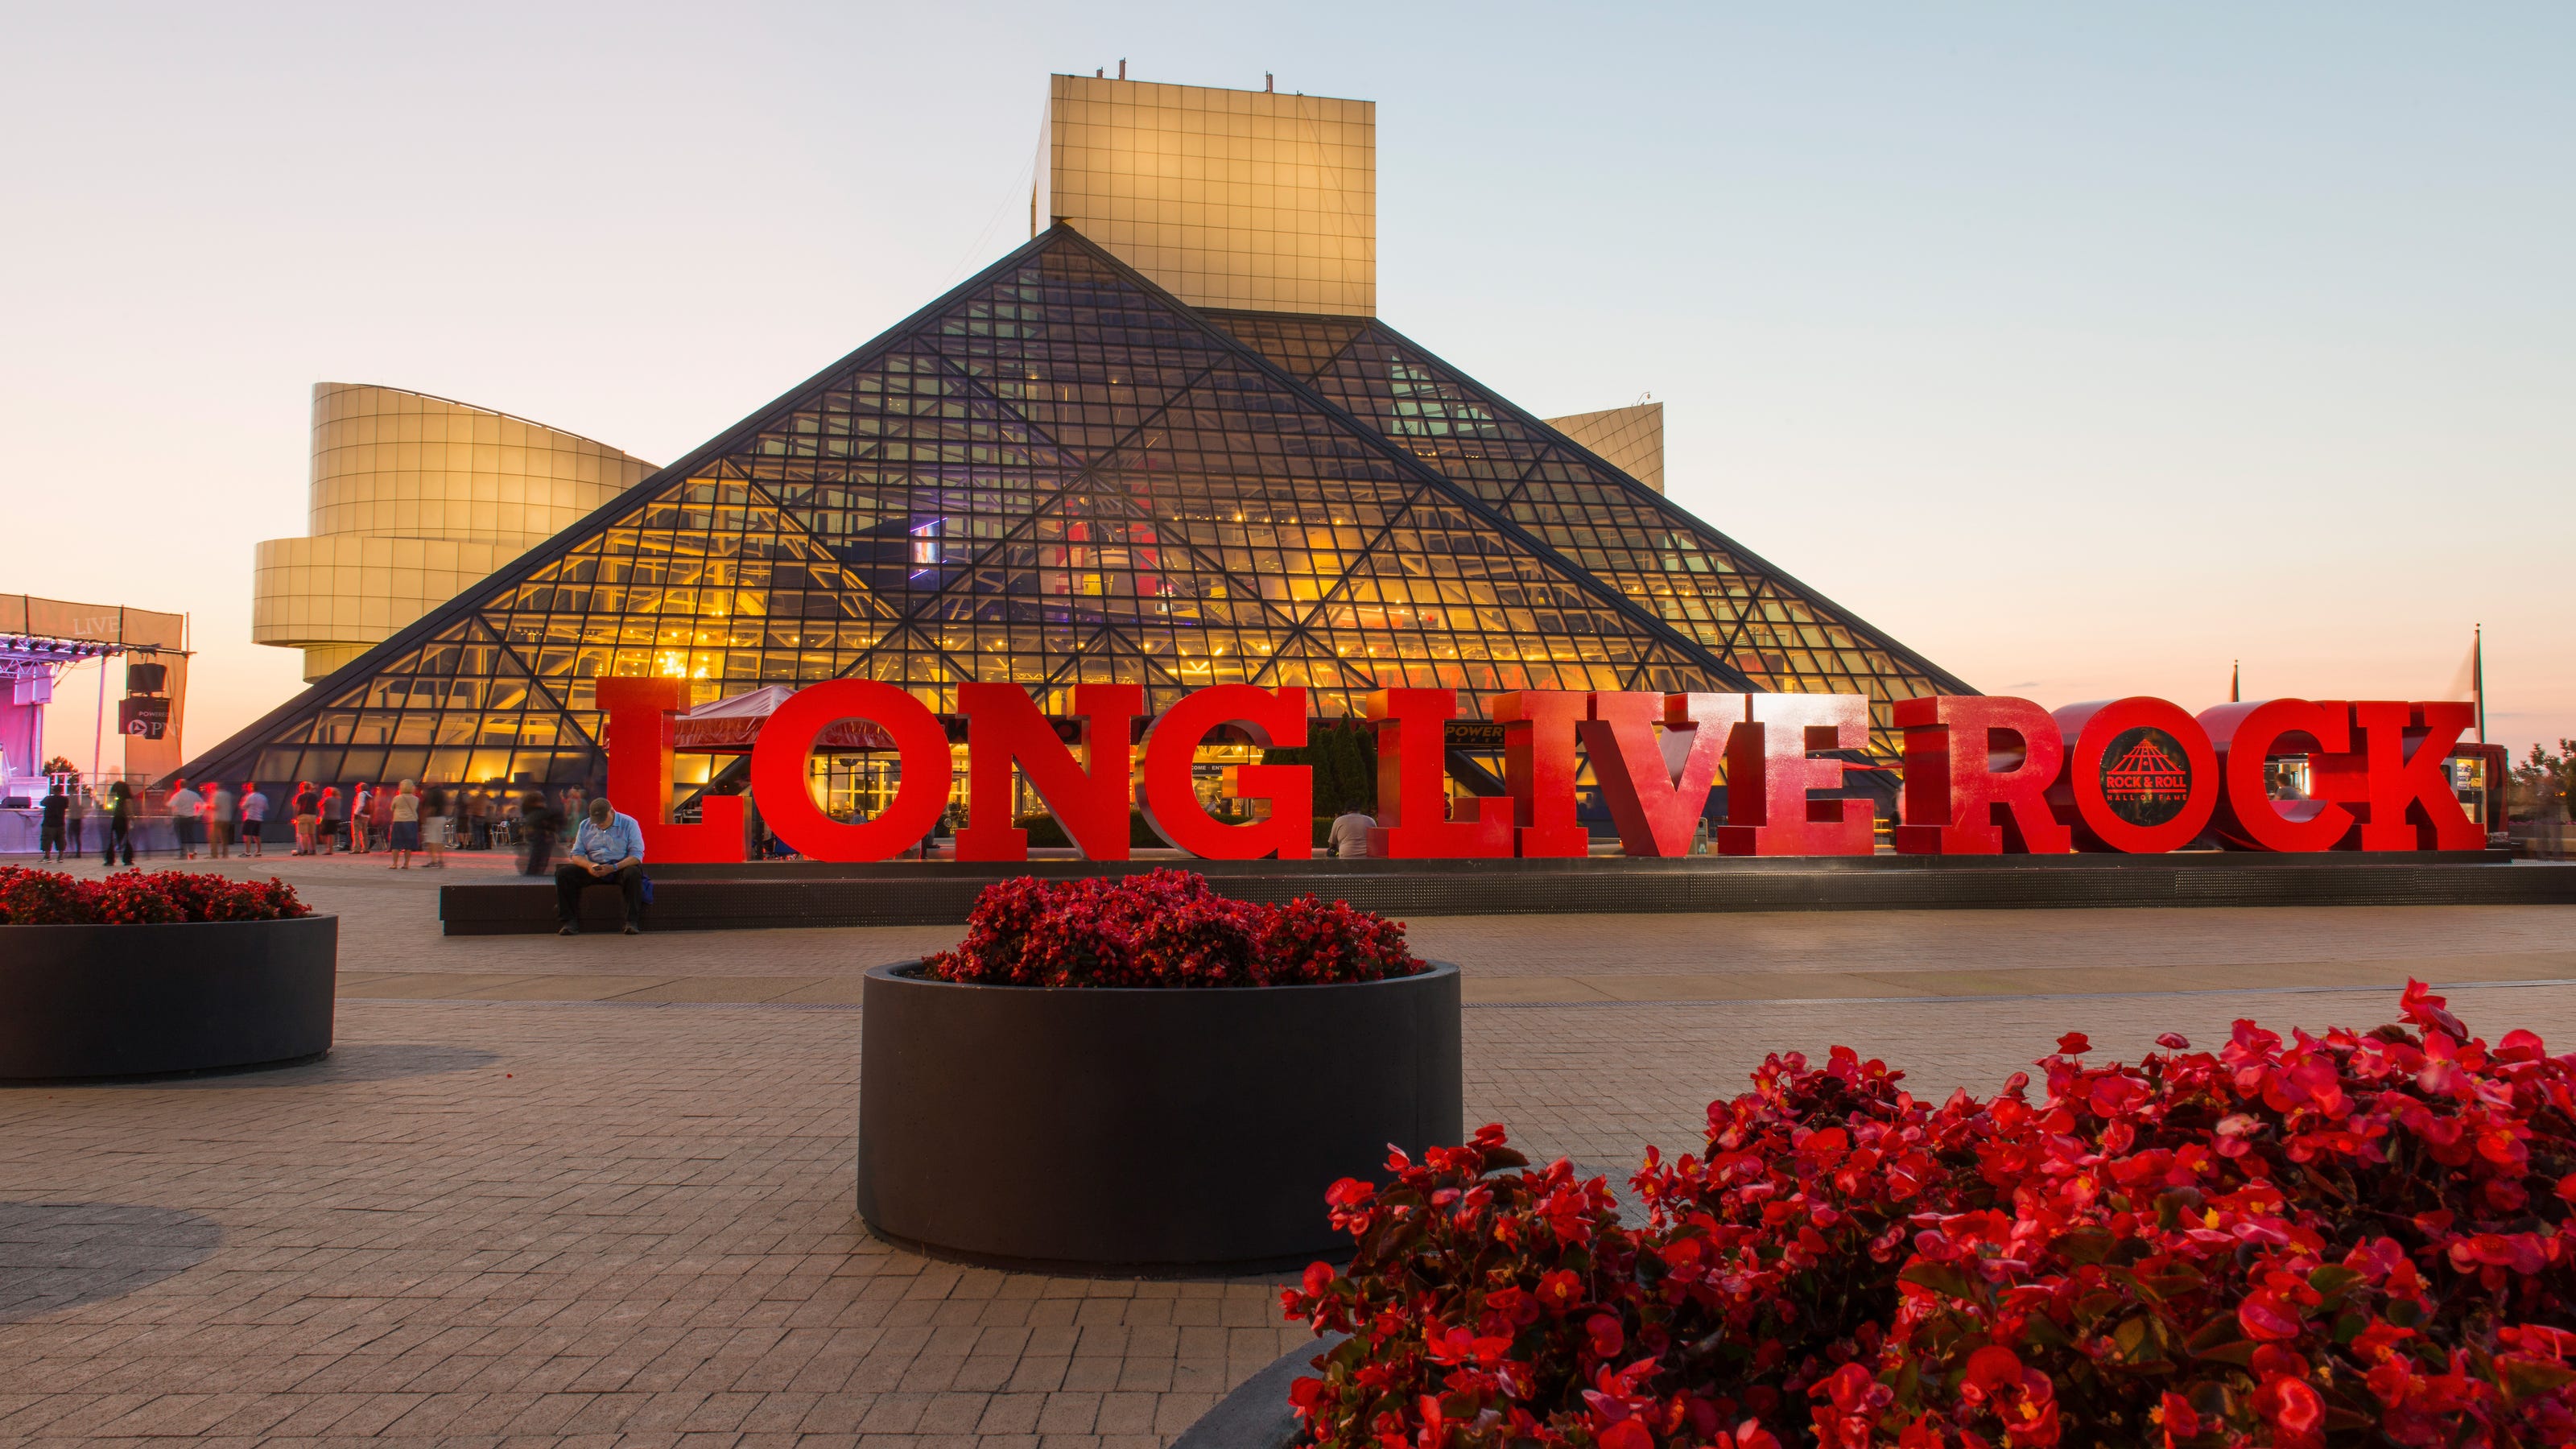 Rock and Roll Hall of Fame to reopen with social distancing rules